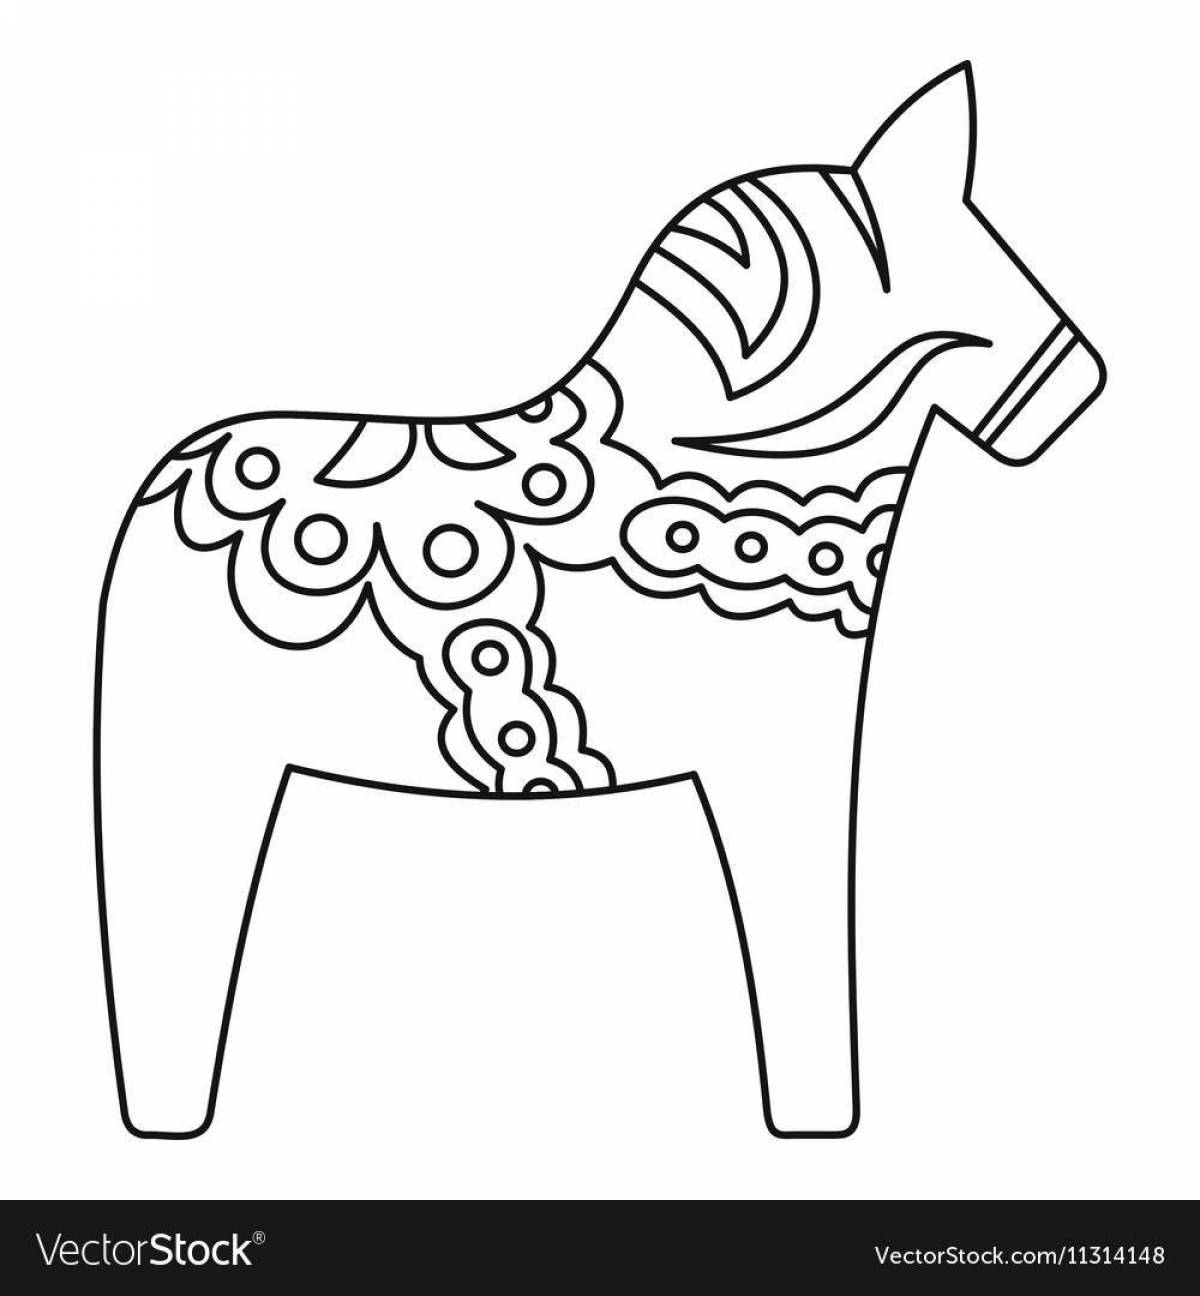 Incredible horse coloring book for kids